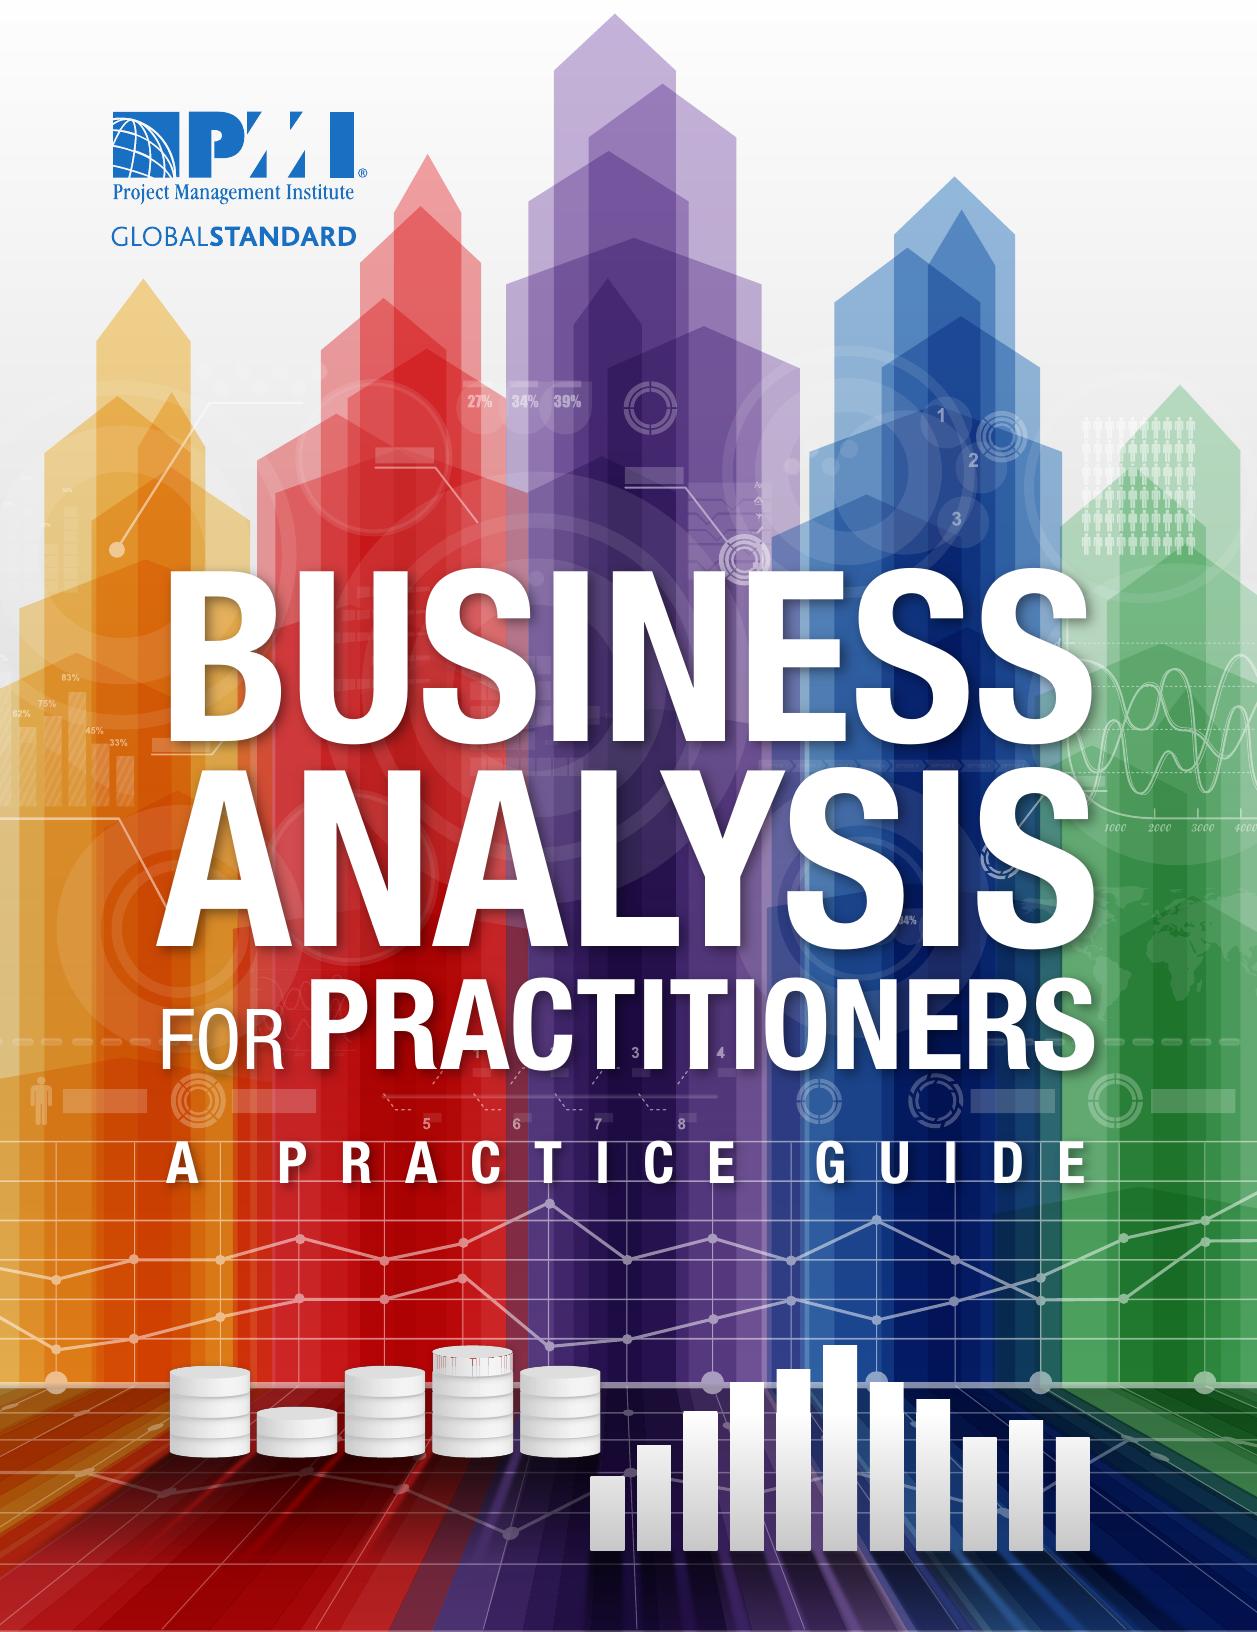 Business Analysis for Practitioners  A Practice Guide provides a foundation for the practical application of busi 2015